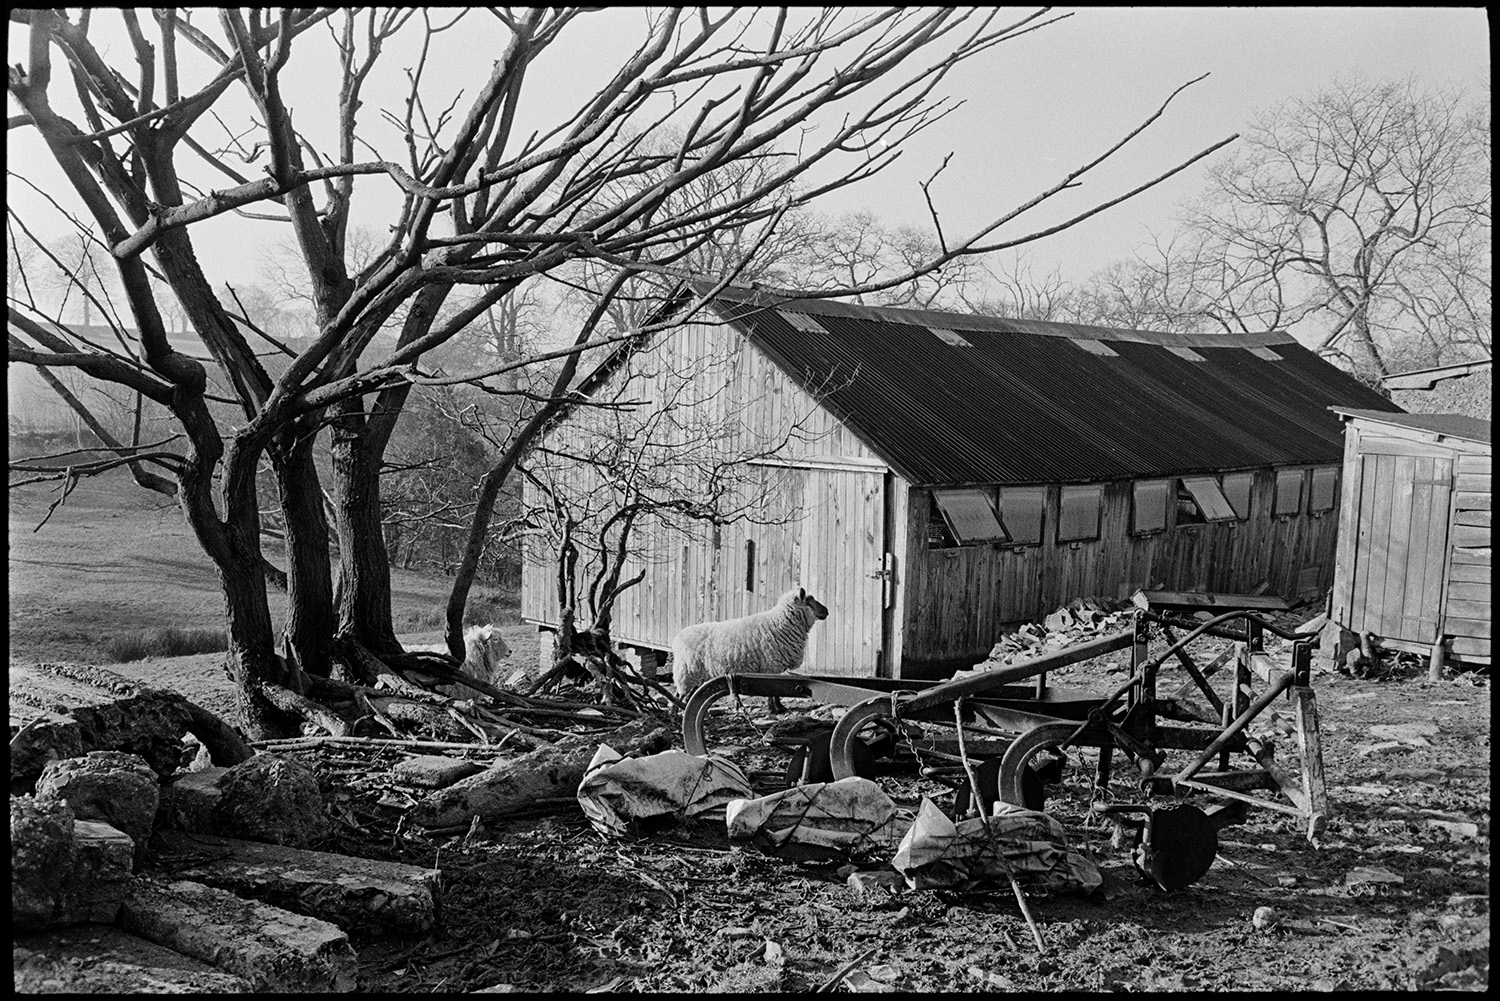 Farmyard, cattle, sheep, implements. 
[A sheep by old farming machinery, including a harrow, and a large wooden poultry house with windows, in a field at Lower Langham, Dolton.]